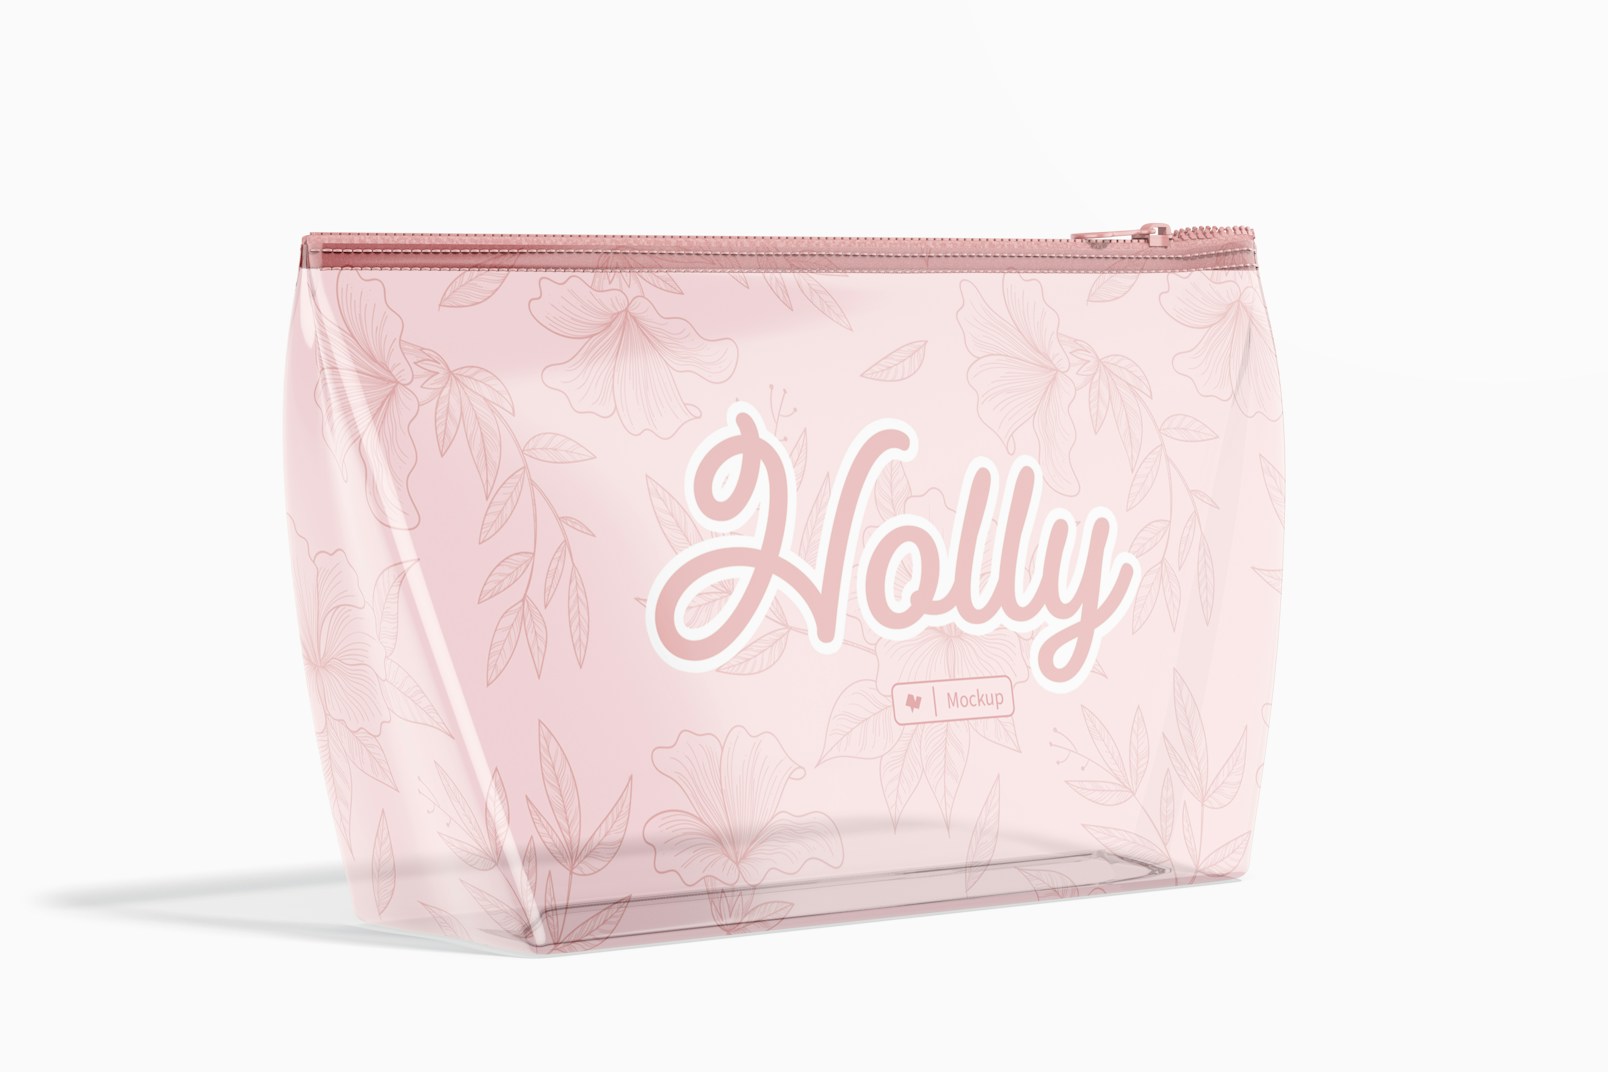 Clear Cosmetic Bag Mockup, Left View